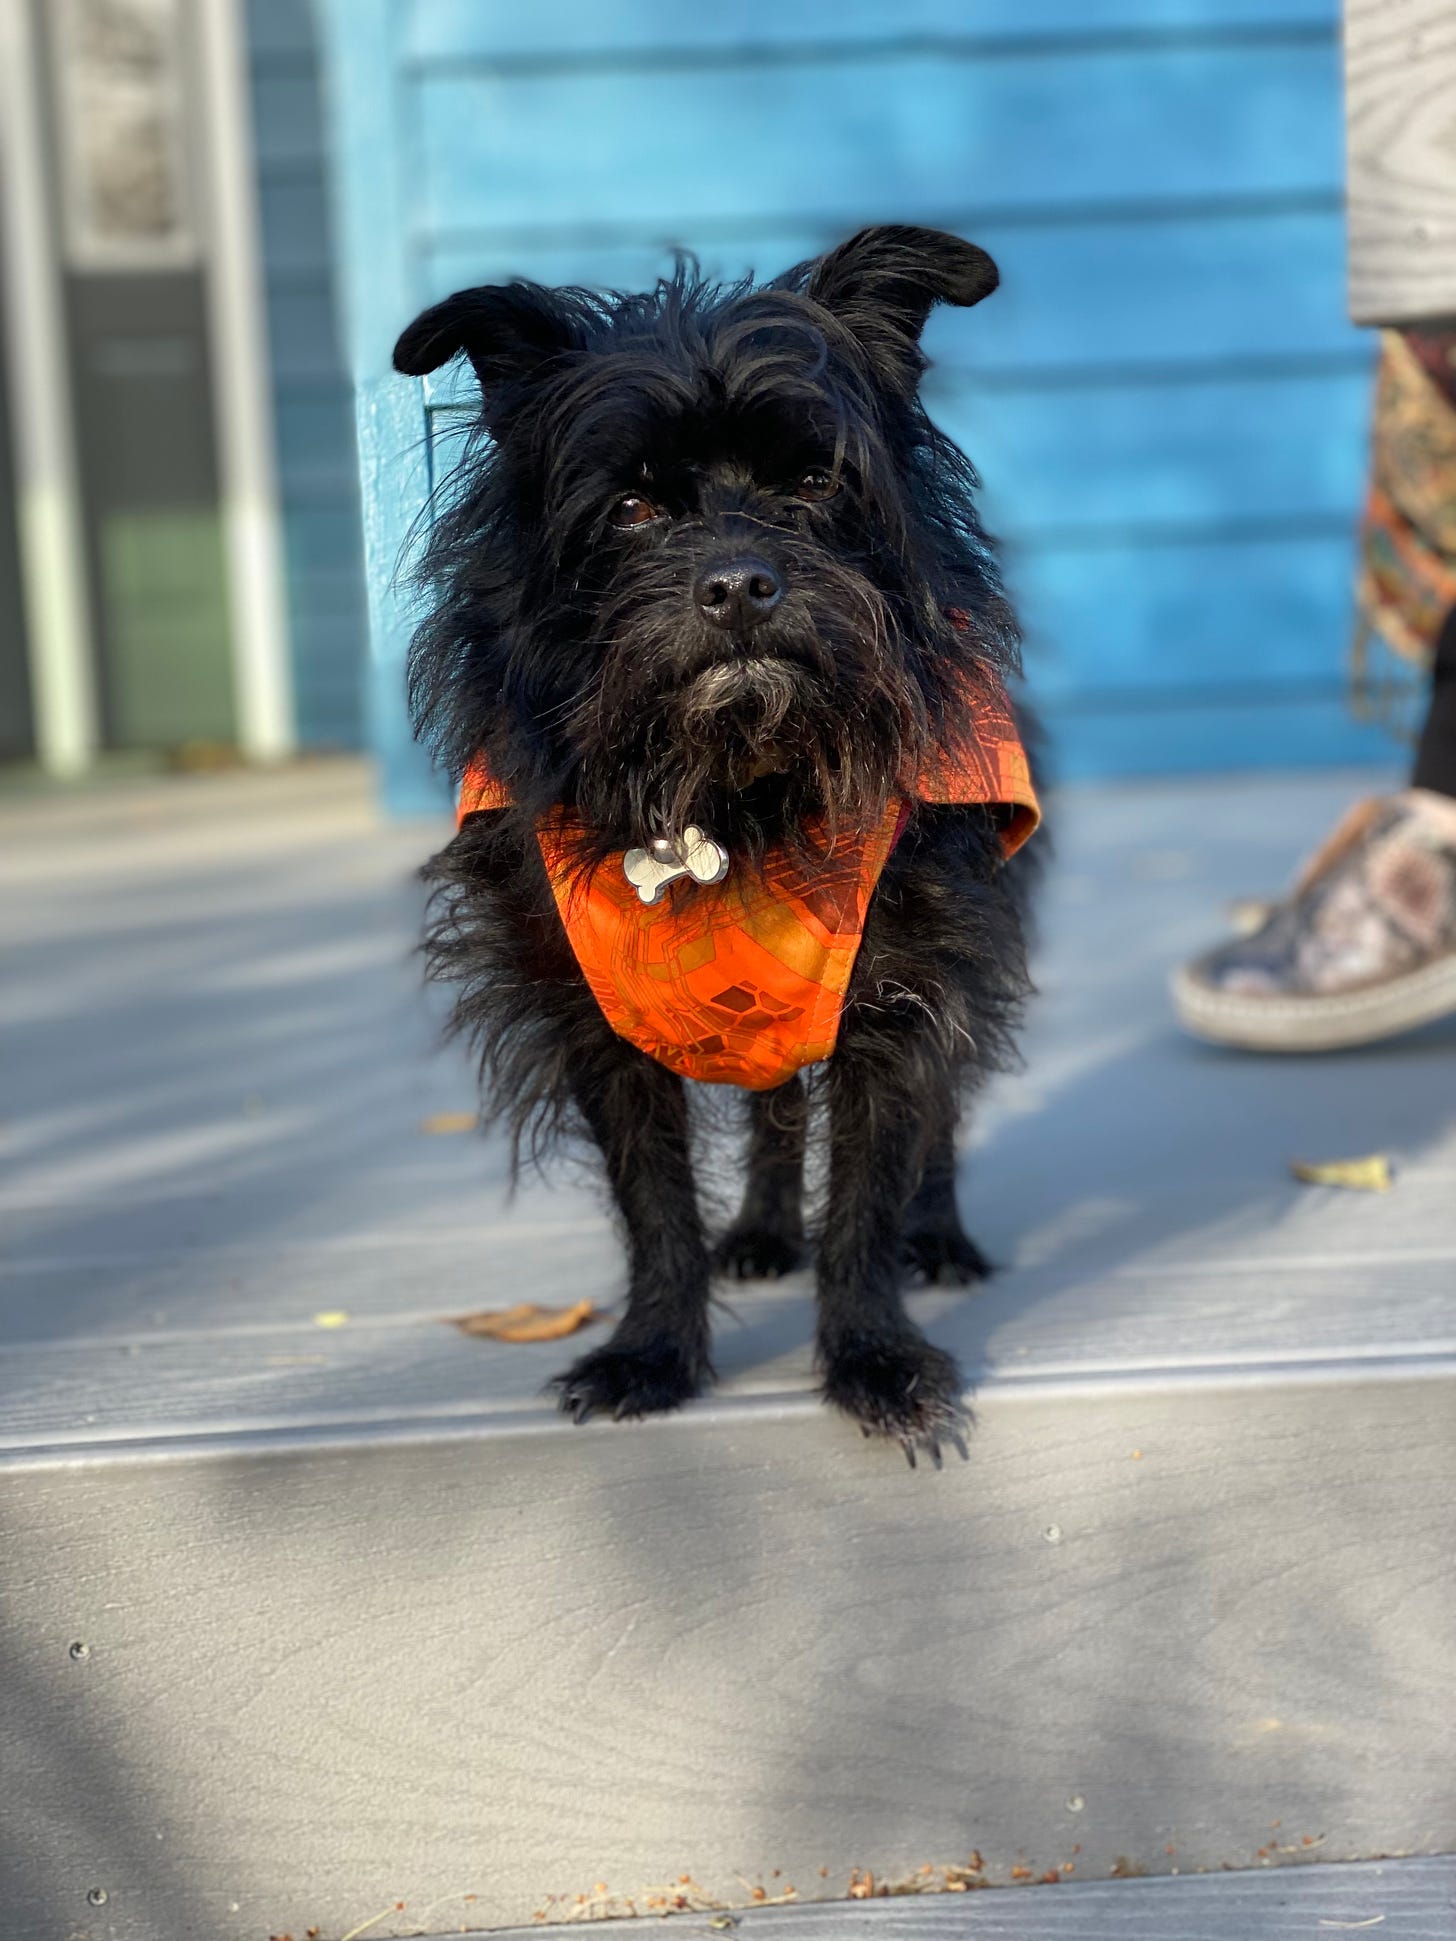 small black scruffy dog standing on a deck in front of a blue house. The dog is wearing an orange vest.